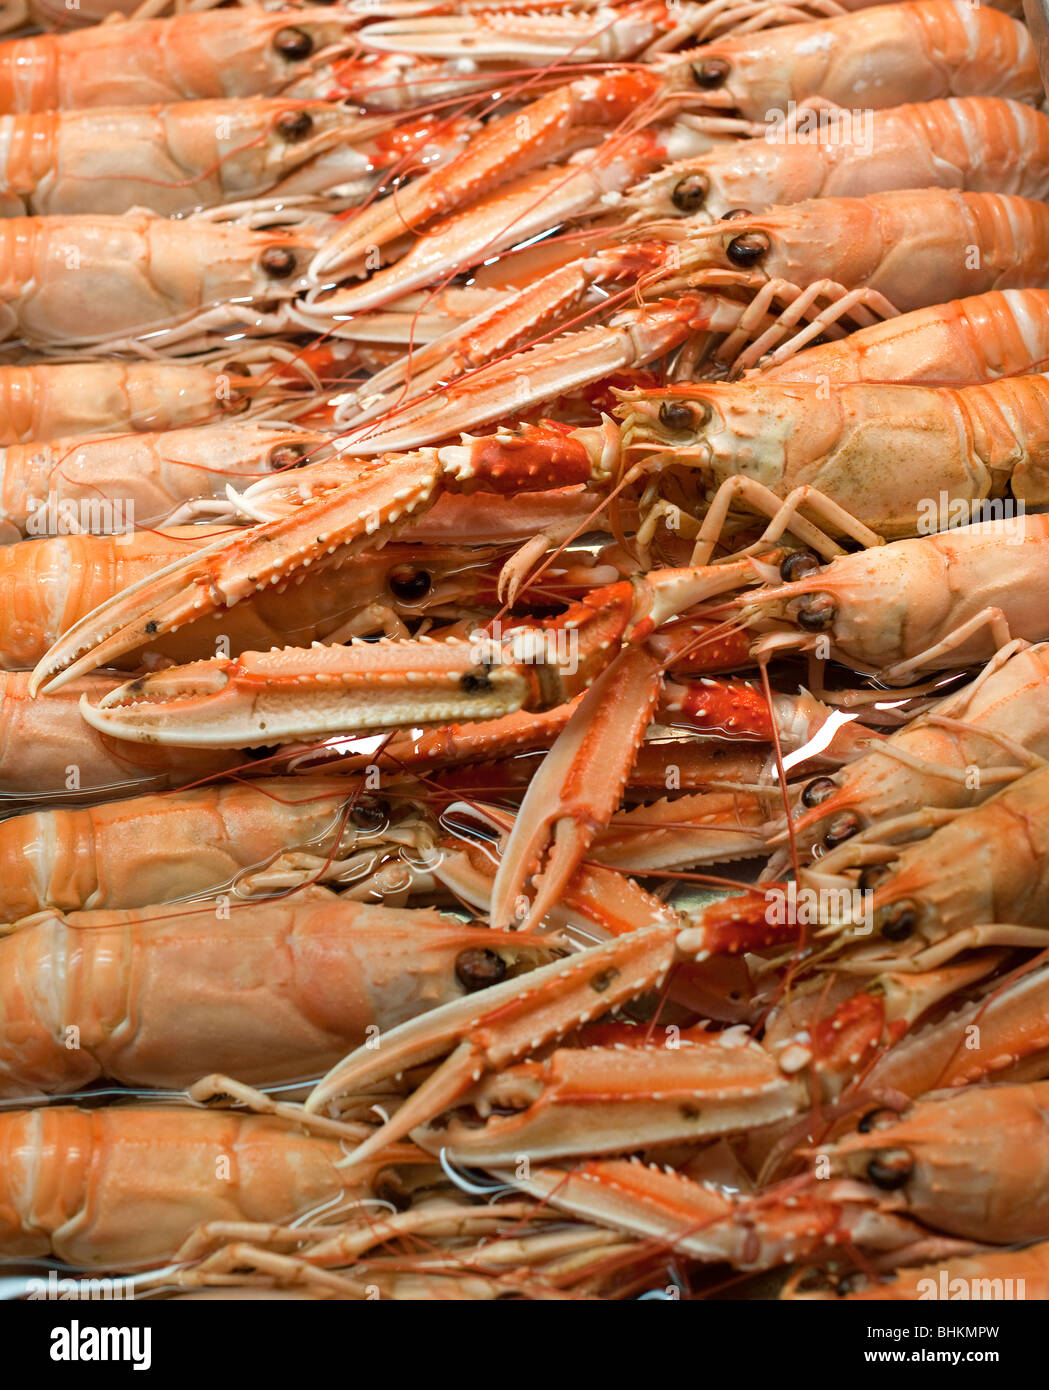 Norway lobster Stock Photo